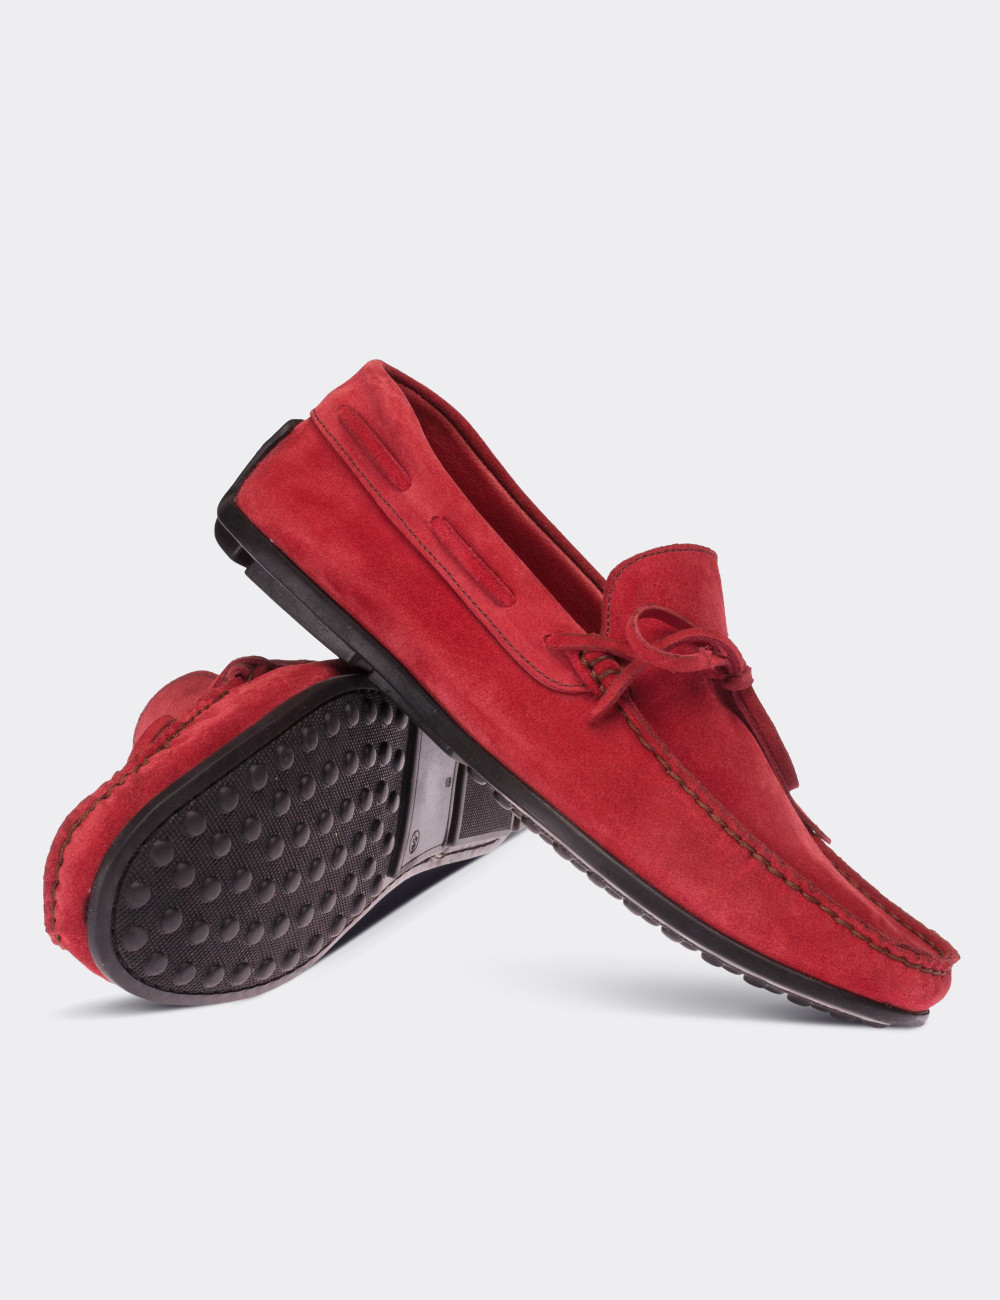 Red Suede Leather Loafers - 01647MKRMC01